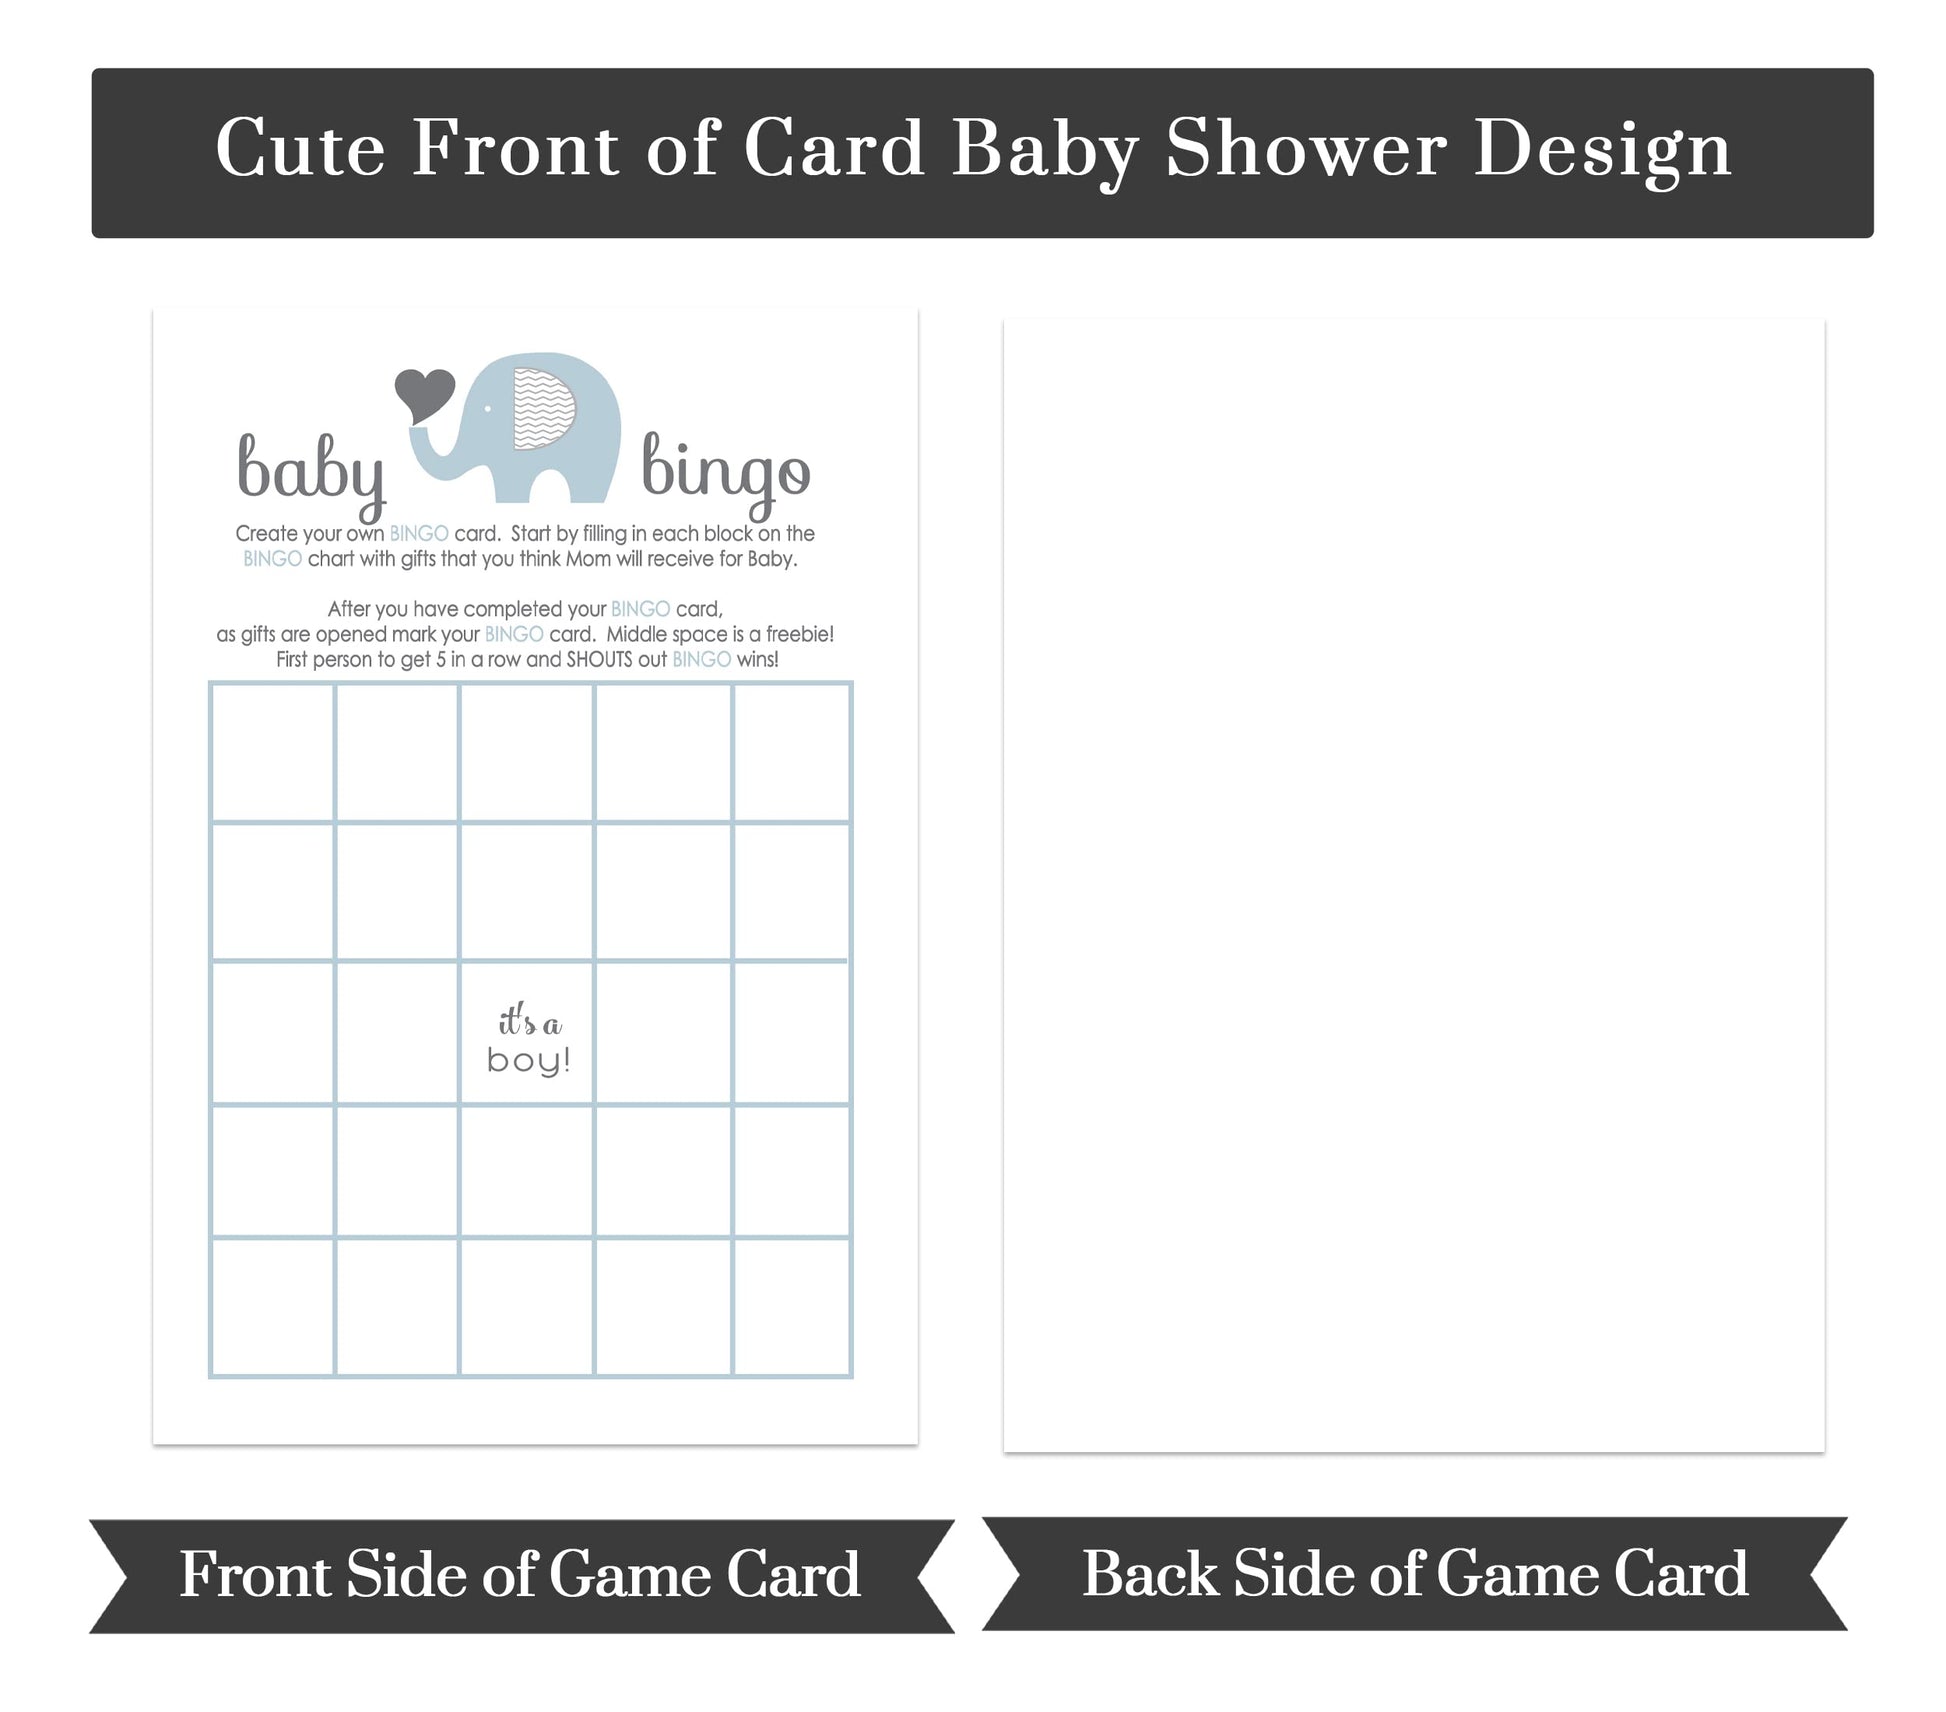 Blue Elephant Baby Shower Bingo Game Cards - Jungle Animal Theme Party SuppliesPaper Clever Party